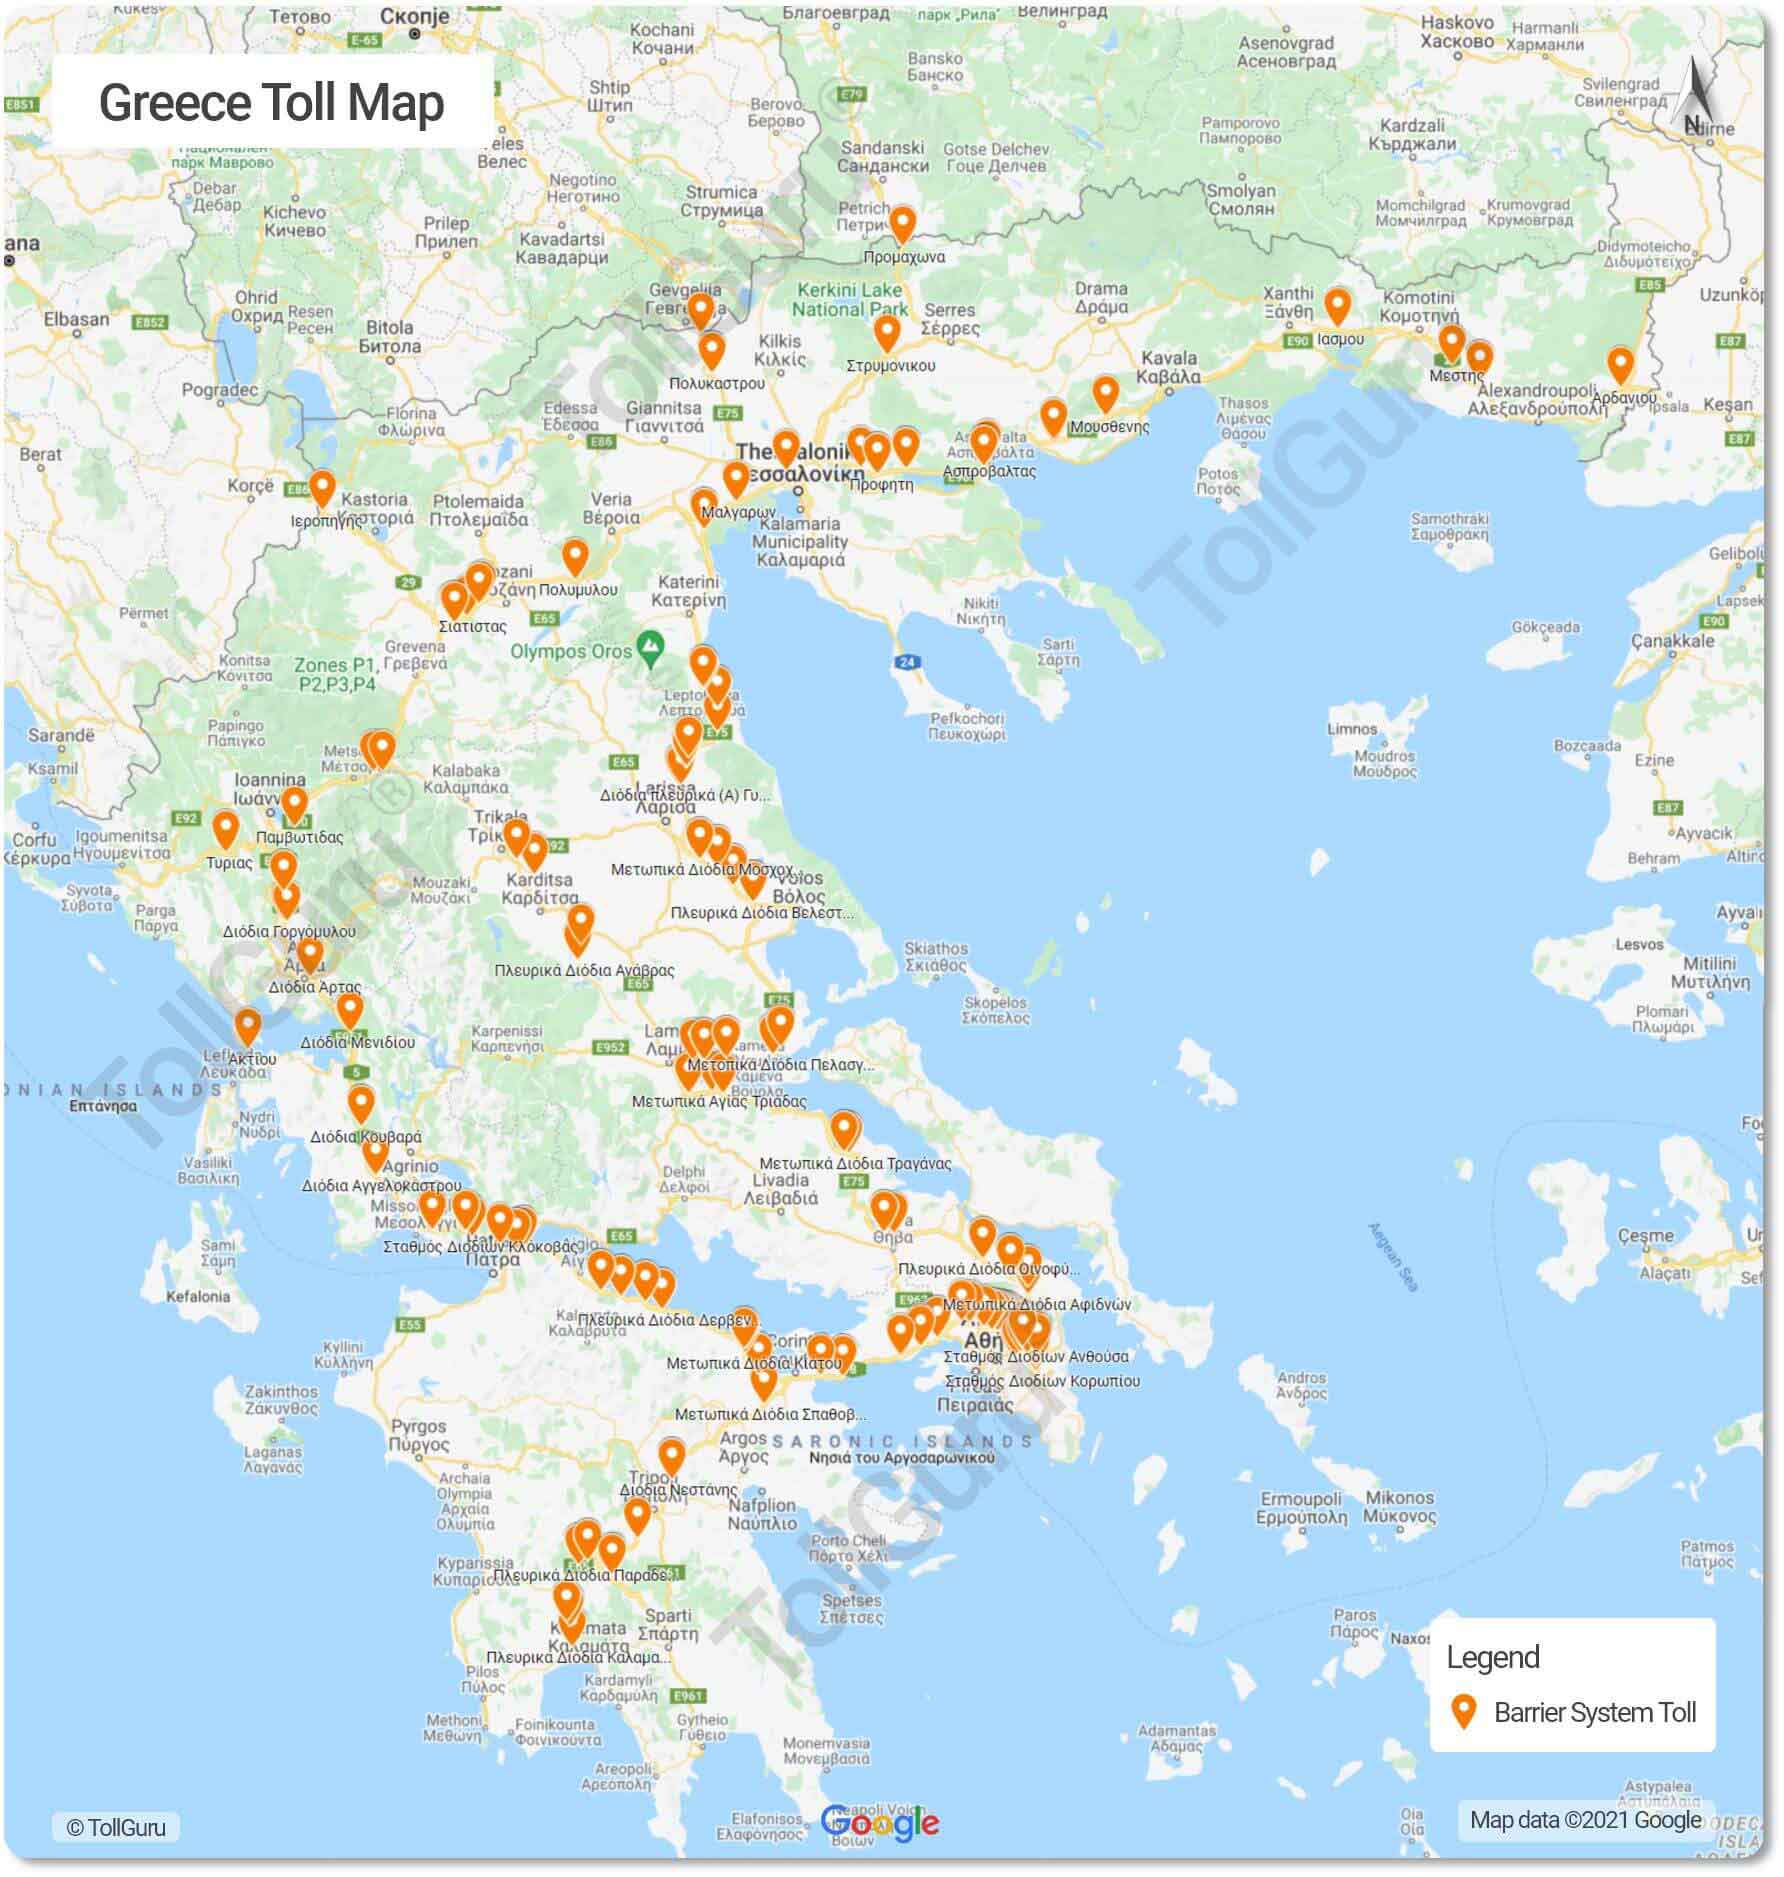 The toll plazas in Greece for all motorways including Aegean and Attiki Odos motorways which accept cash, card or transponders.